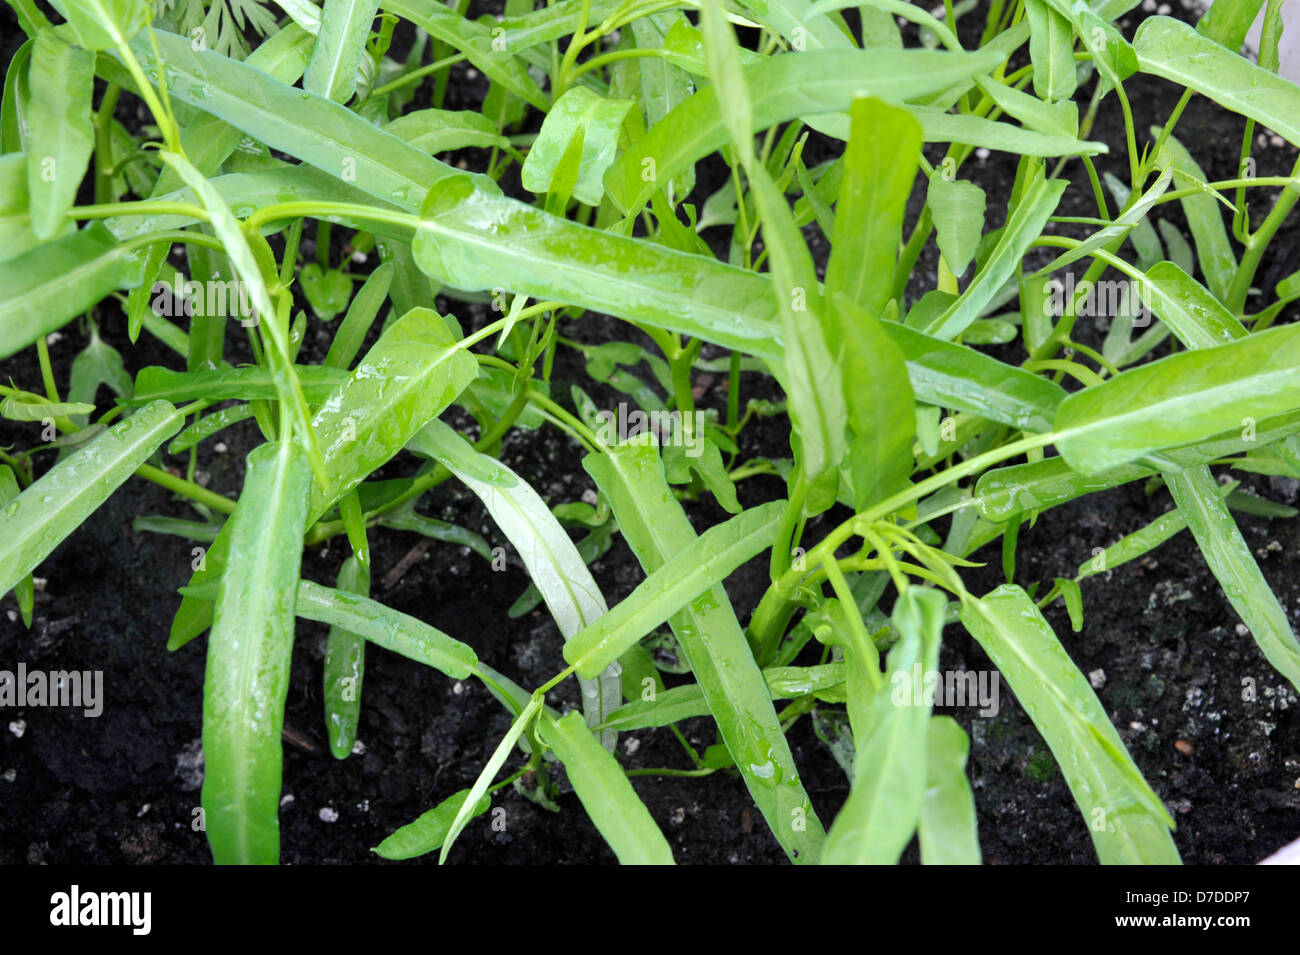 Pak boong, also known as Water Spinach, River Spinach, water morning glory or kang kong and used in many Asian dishes. Stock Photo